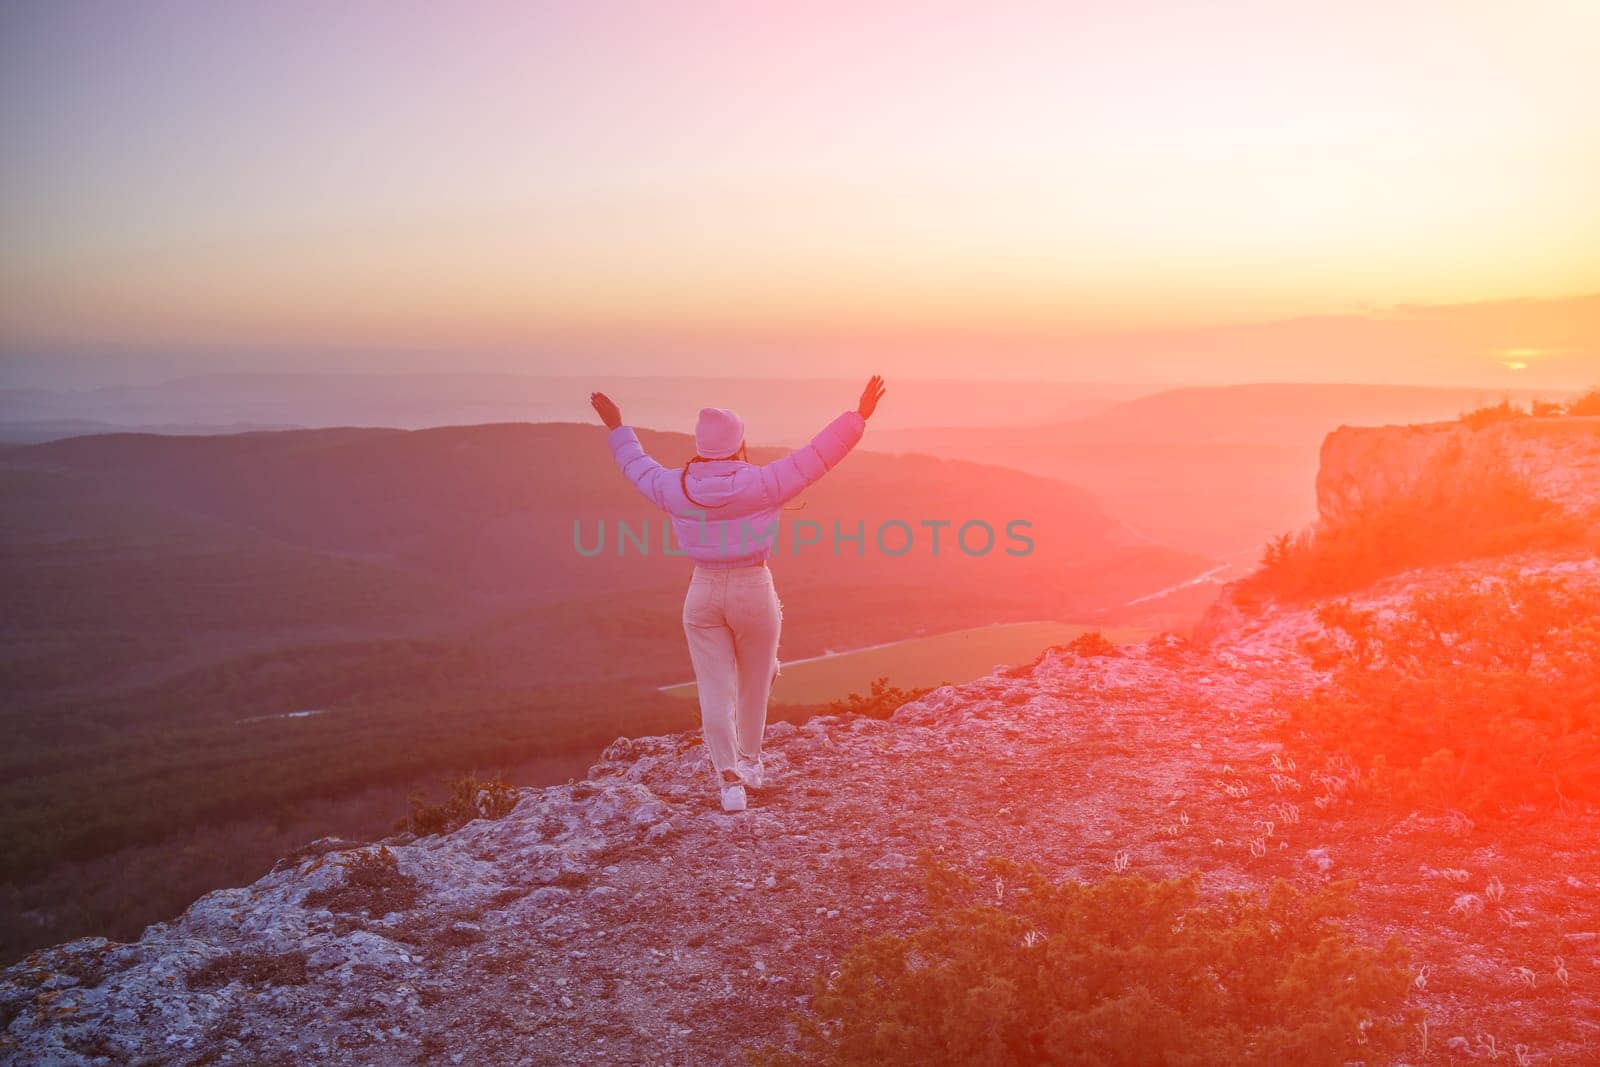 Woman hiker open arms on top of sunrise mountain. The girl salutes the sun, wearing a blue jacket, white hat and white jeans. Conceptual design